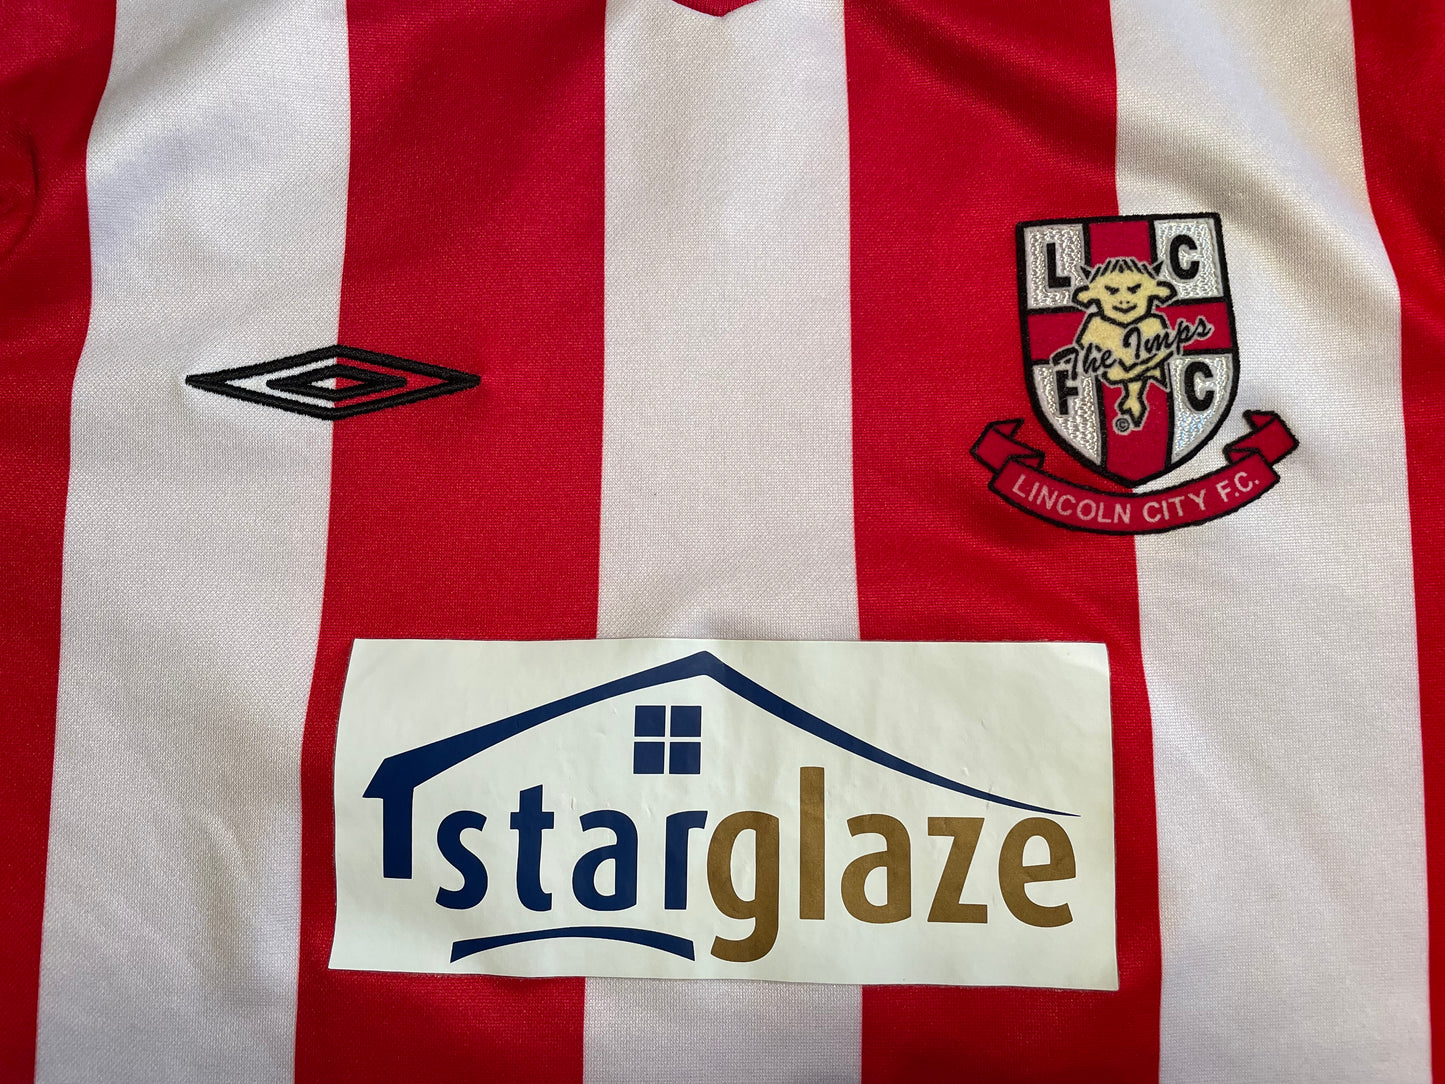 Lincoln City 2007 Home Shirt (very good) Adults XXS/Youths. Height 21 inches